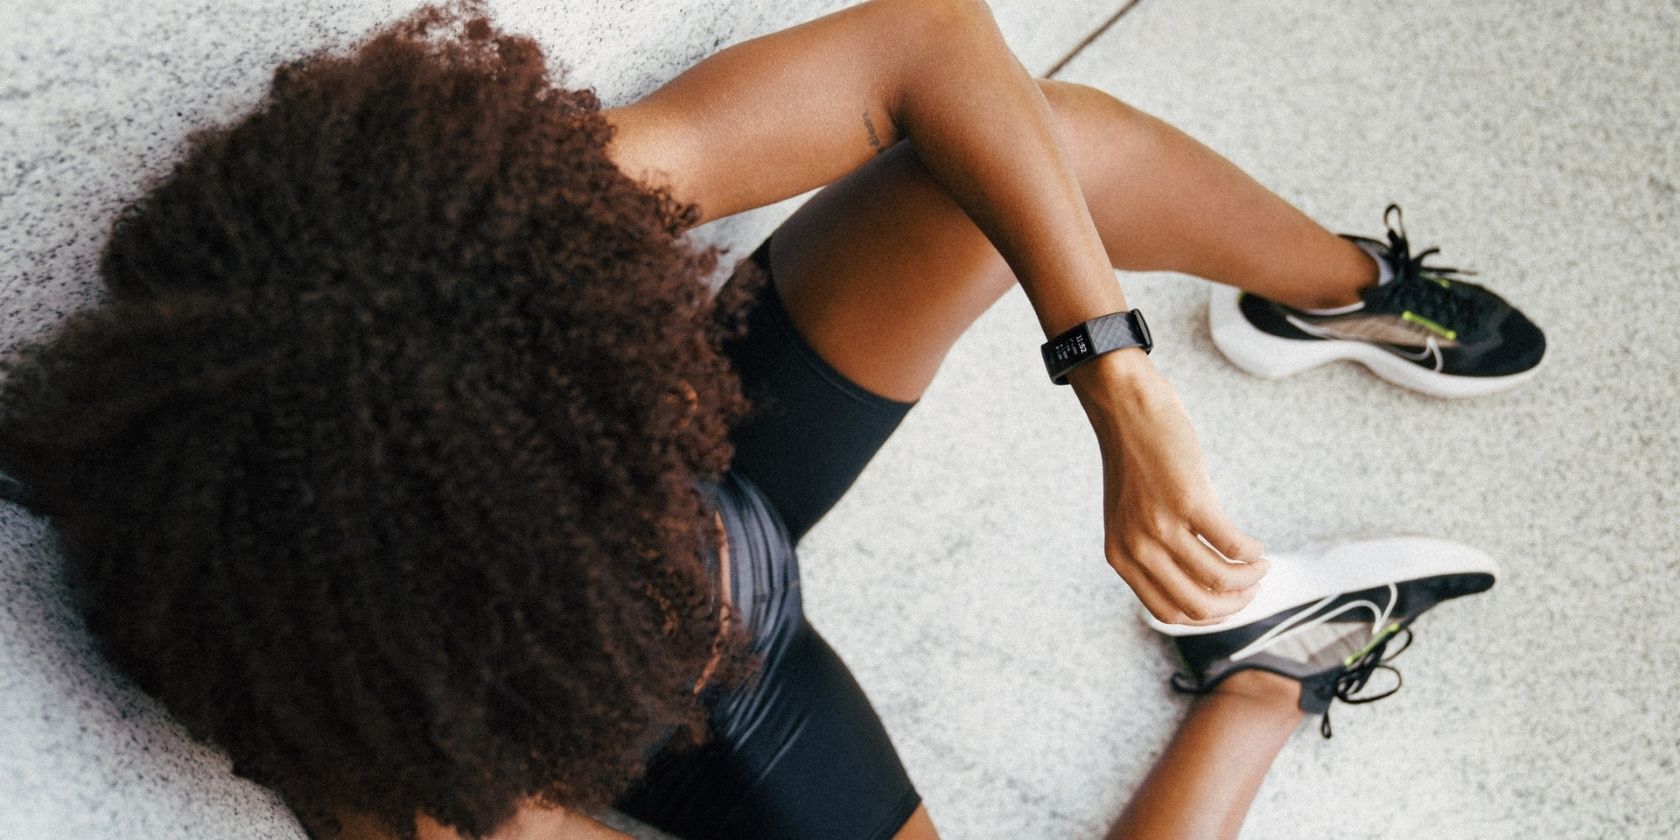 10 Fixes When Your Fitbit Won’t Sync